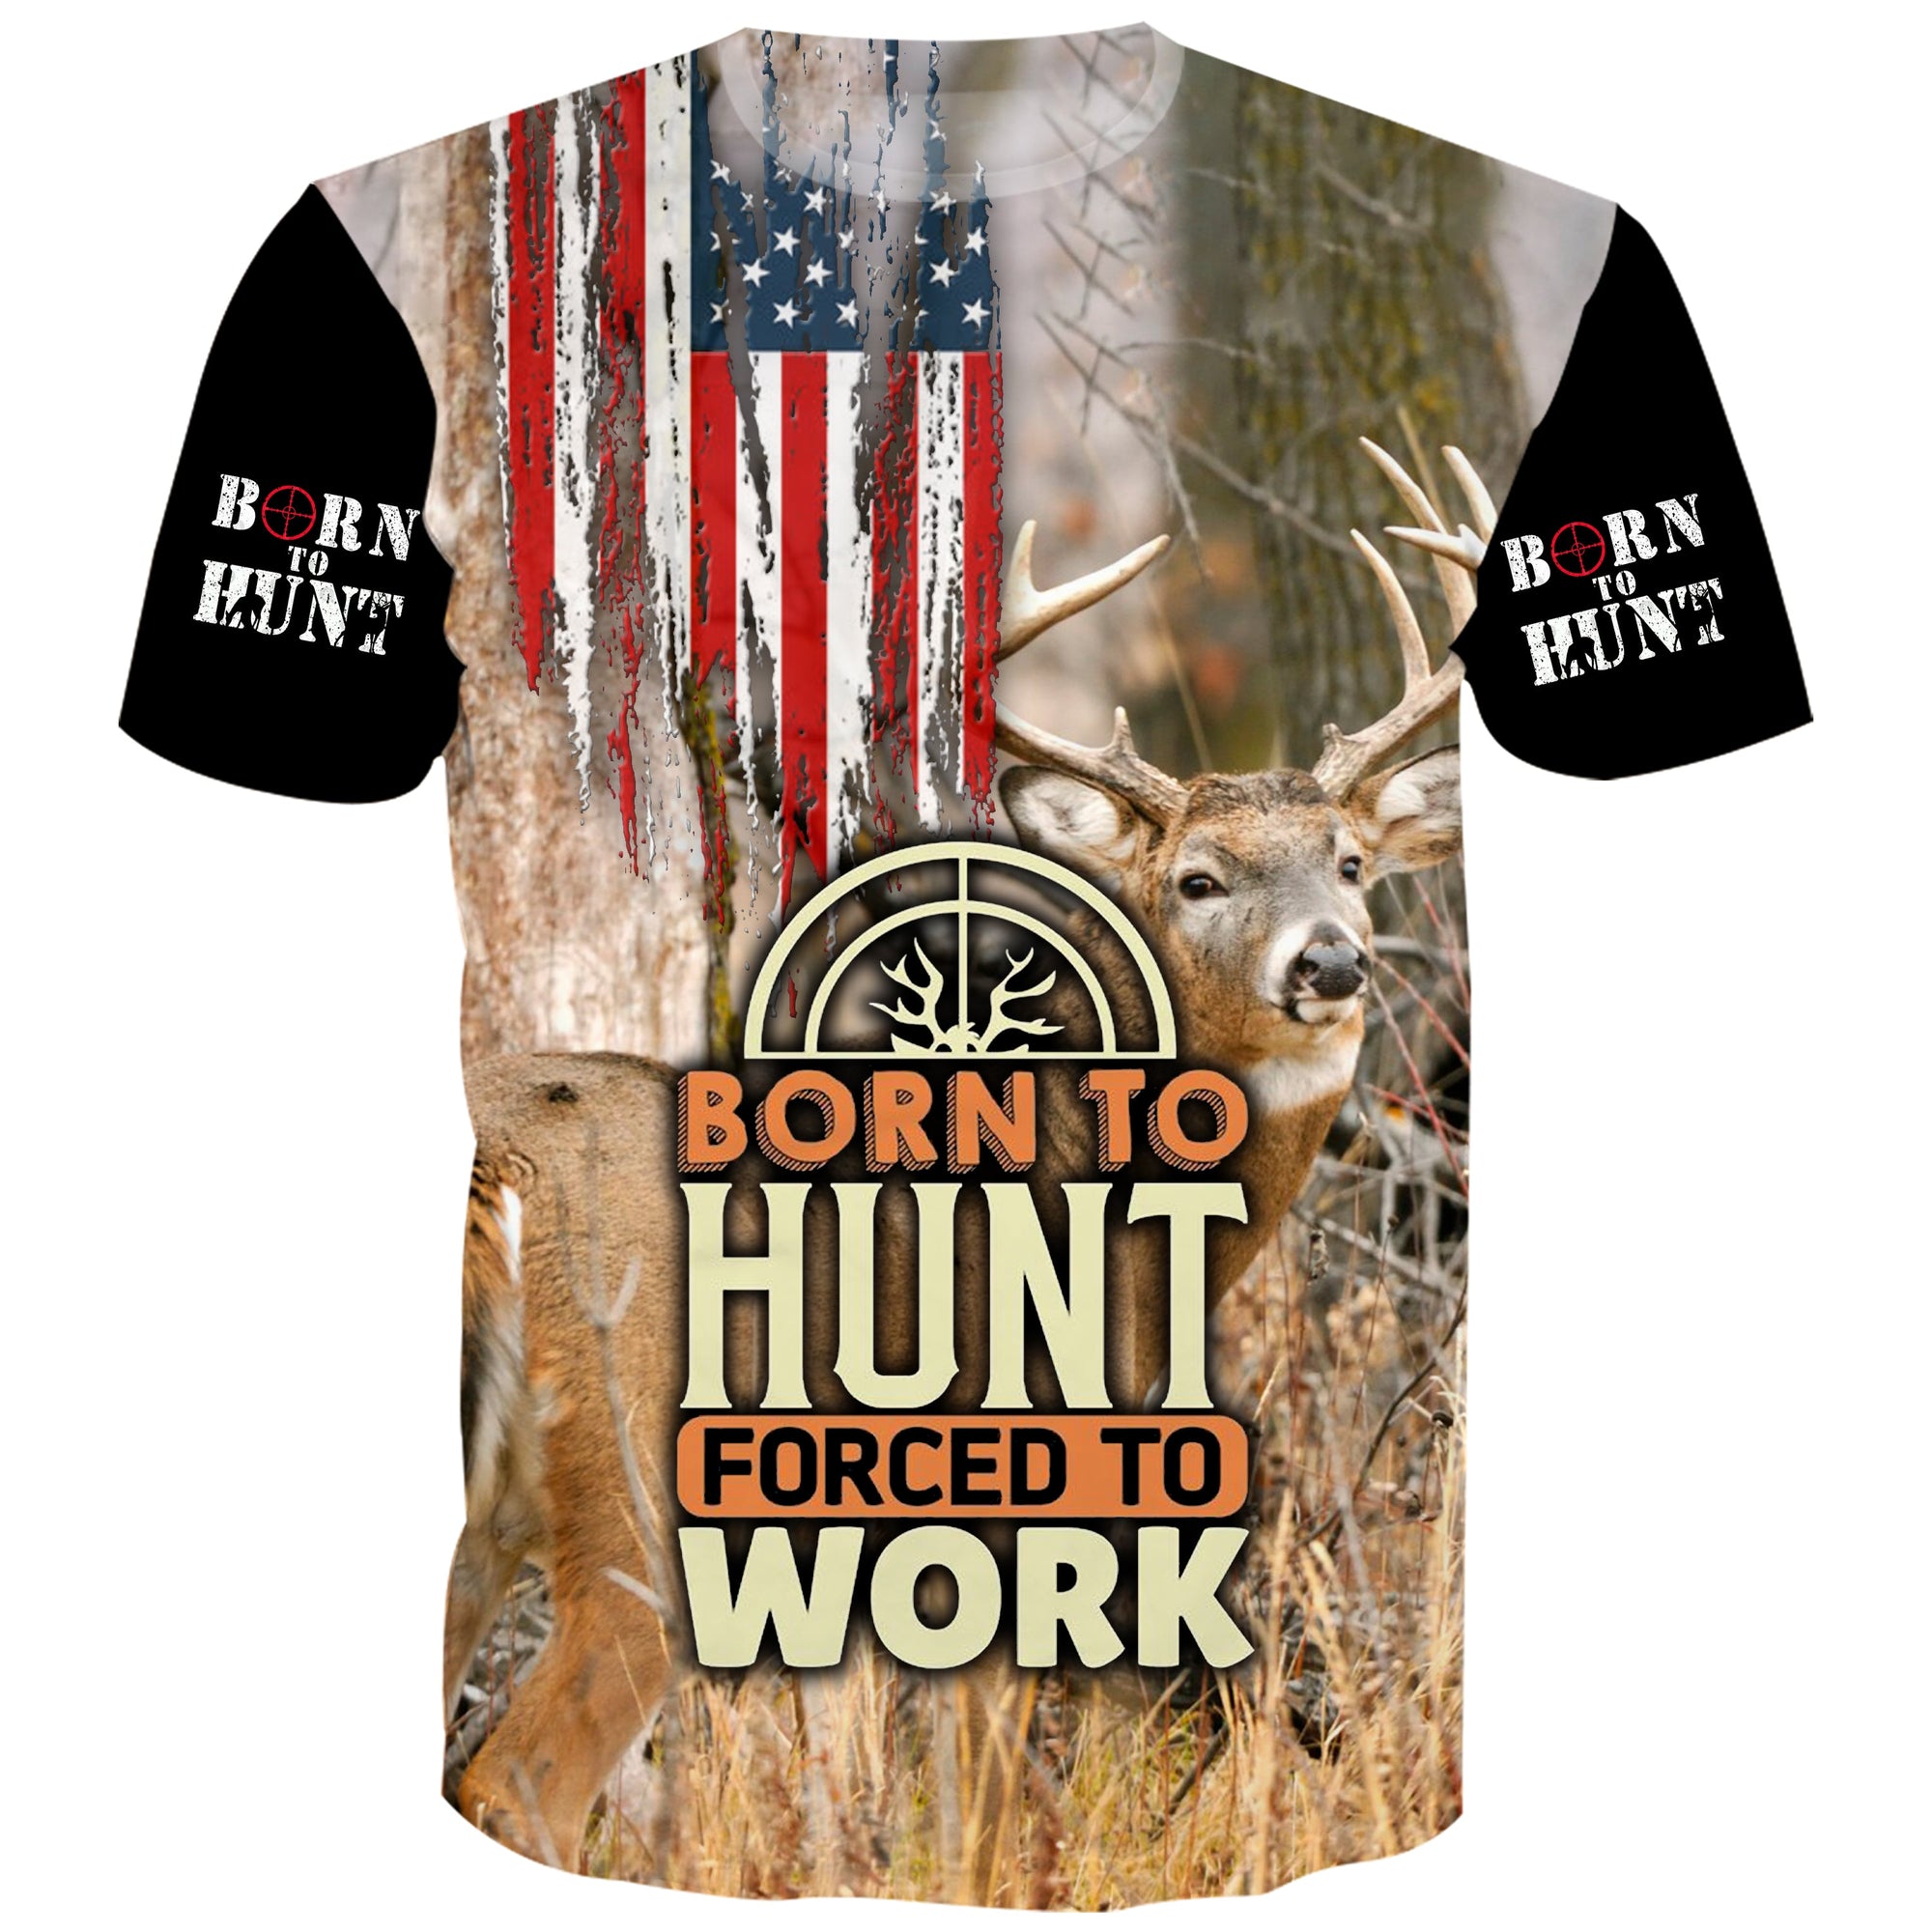 Born to Hunt, Forced to Work - T-Shirt